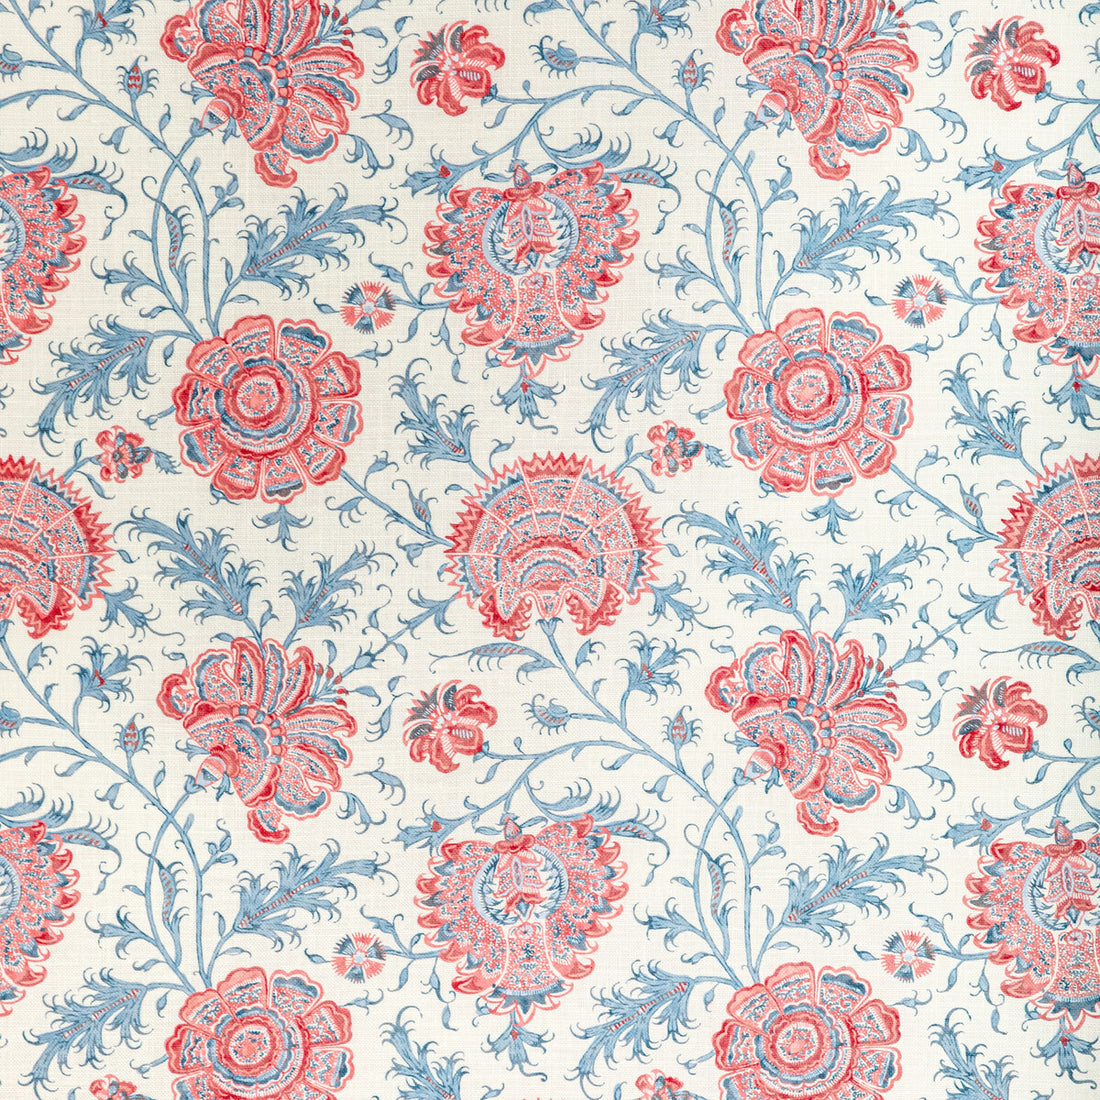 Indiennes Floral fabric in berry color - pattern 2022108.195.0 - by Lee Jofa in the Sarah Bartholomew collection